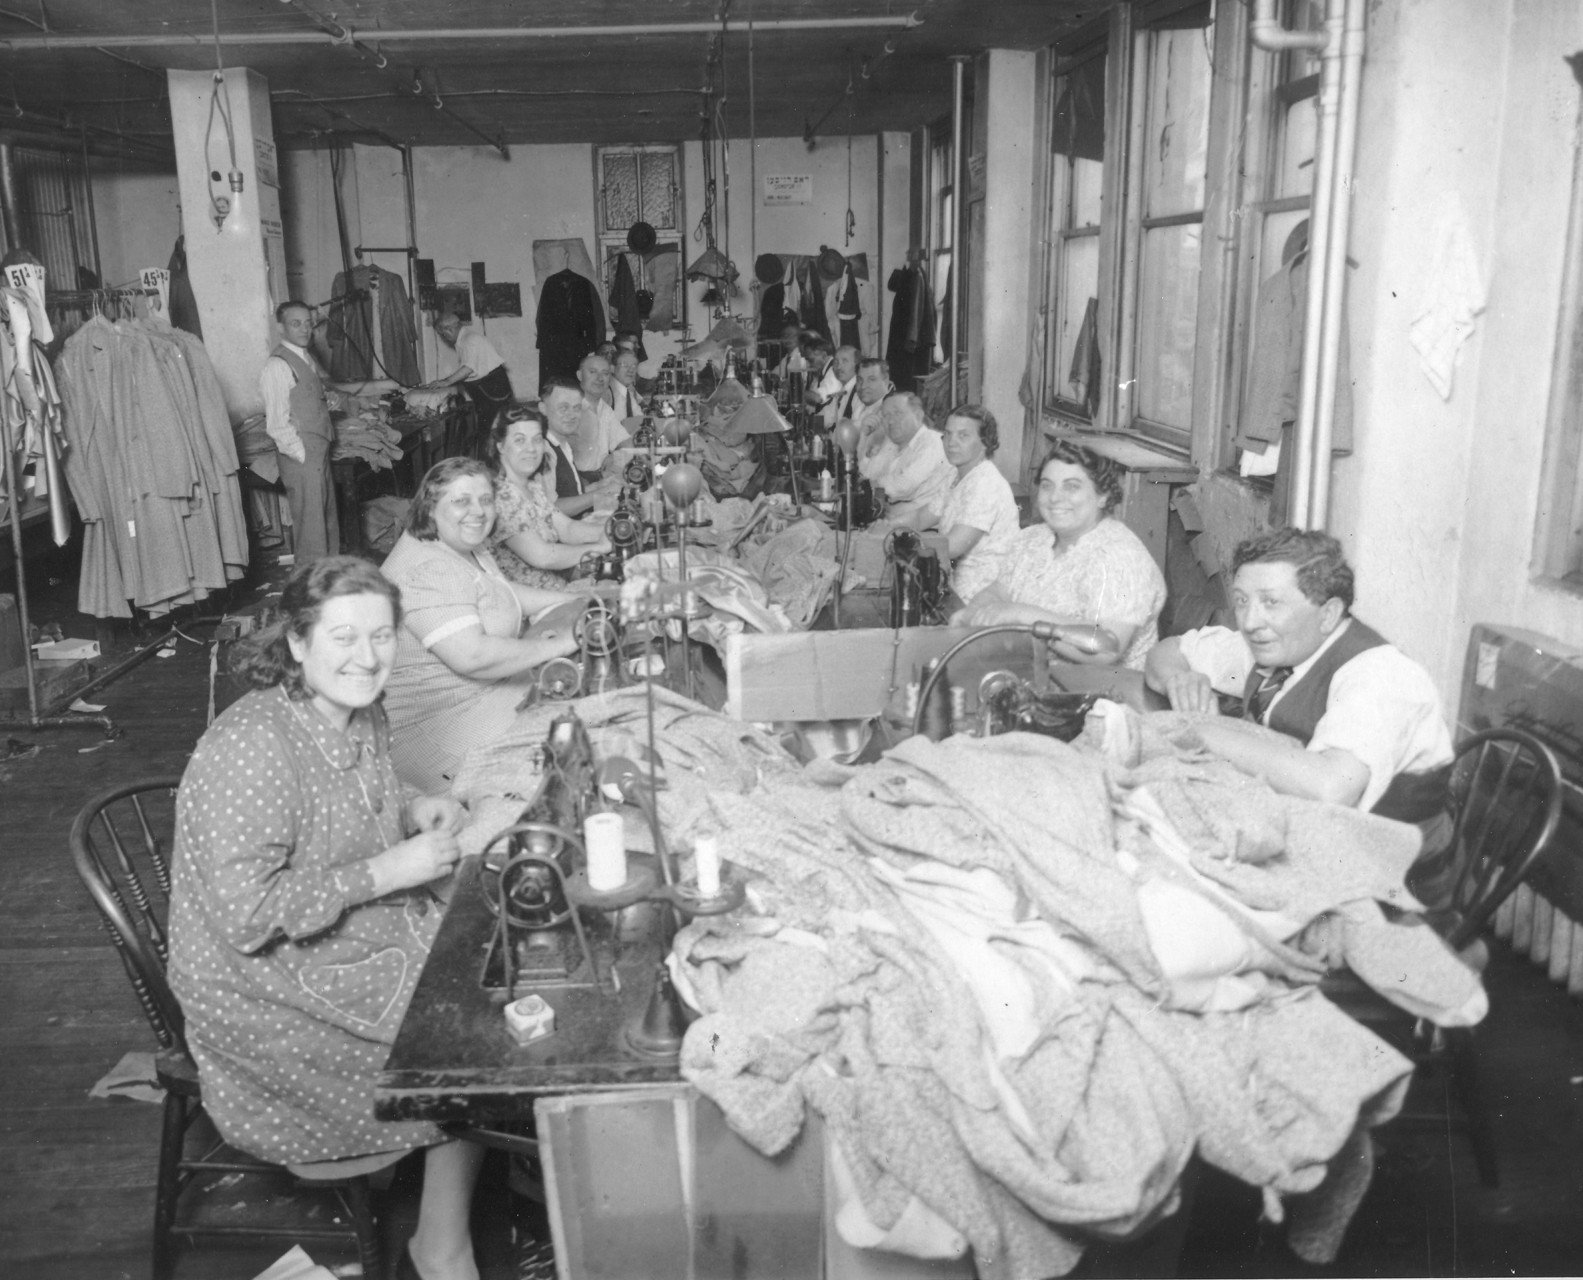 Garment factory in the 1940s with two rows of adults pictured smiling while working at their sewing stations